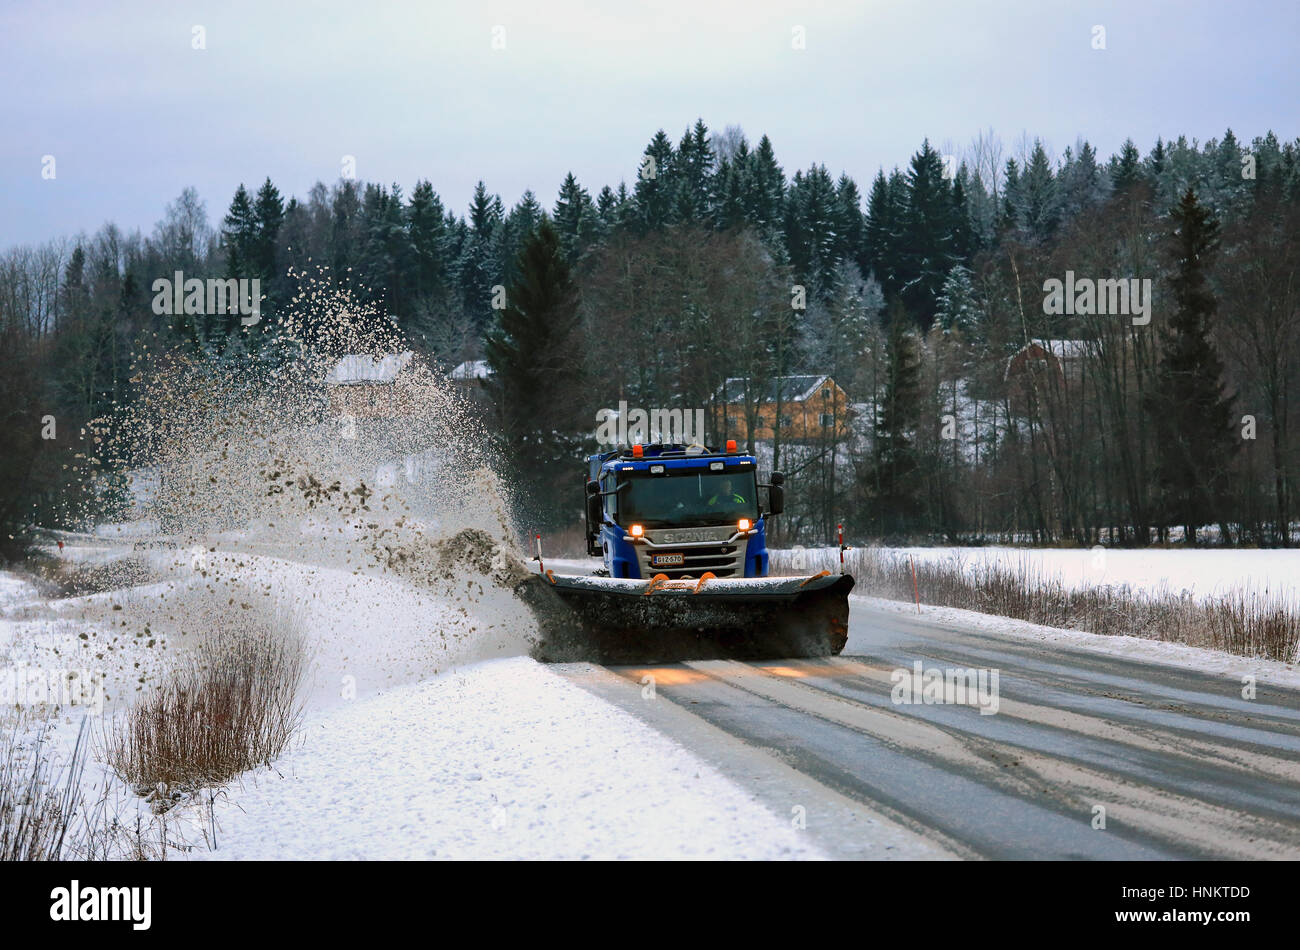 SALO, FINLAND - JANUARY 14: Scania truck equipped with snowplow removes snow and sleet from highway in South of Finland on a cloudy day in winter. Stock Photo